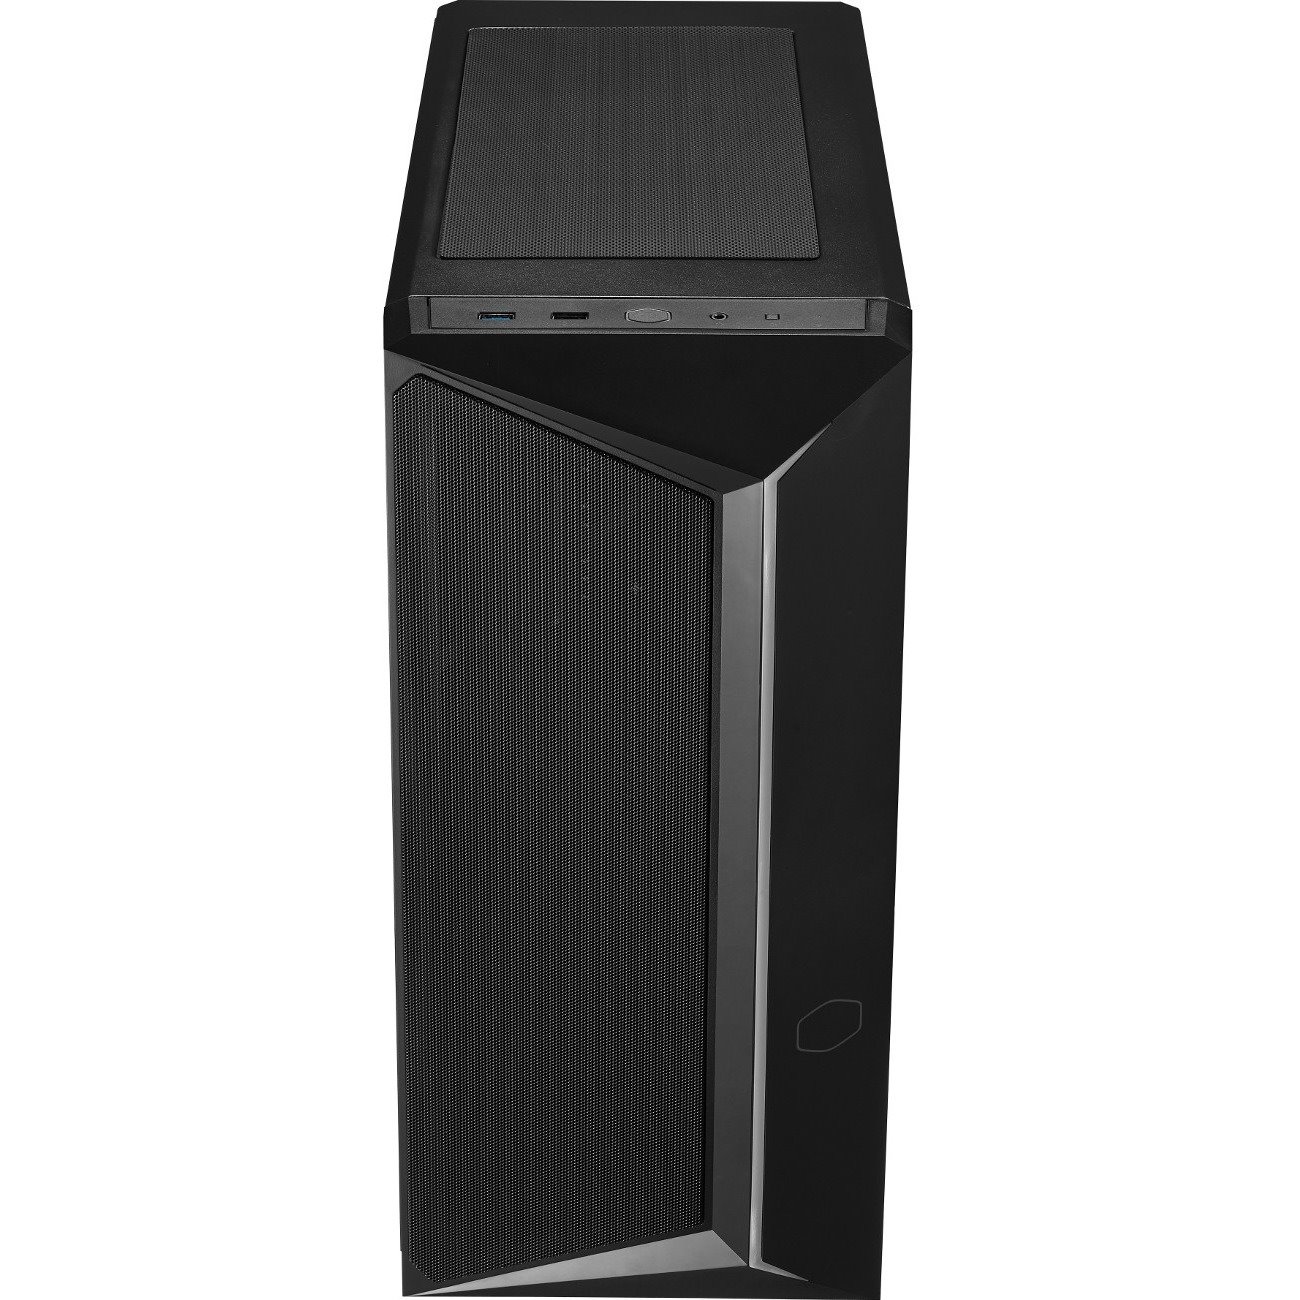 Cooler Master Computer Case - ATX, Mini ITX, Micro ATX Motherboard Supported - Mid-tower - Tempered Glass, Plastic, Steel - Black